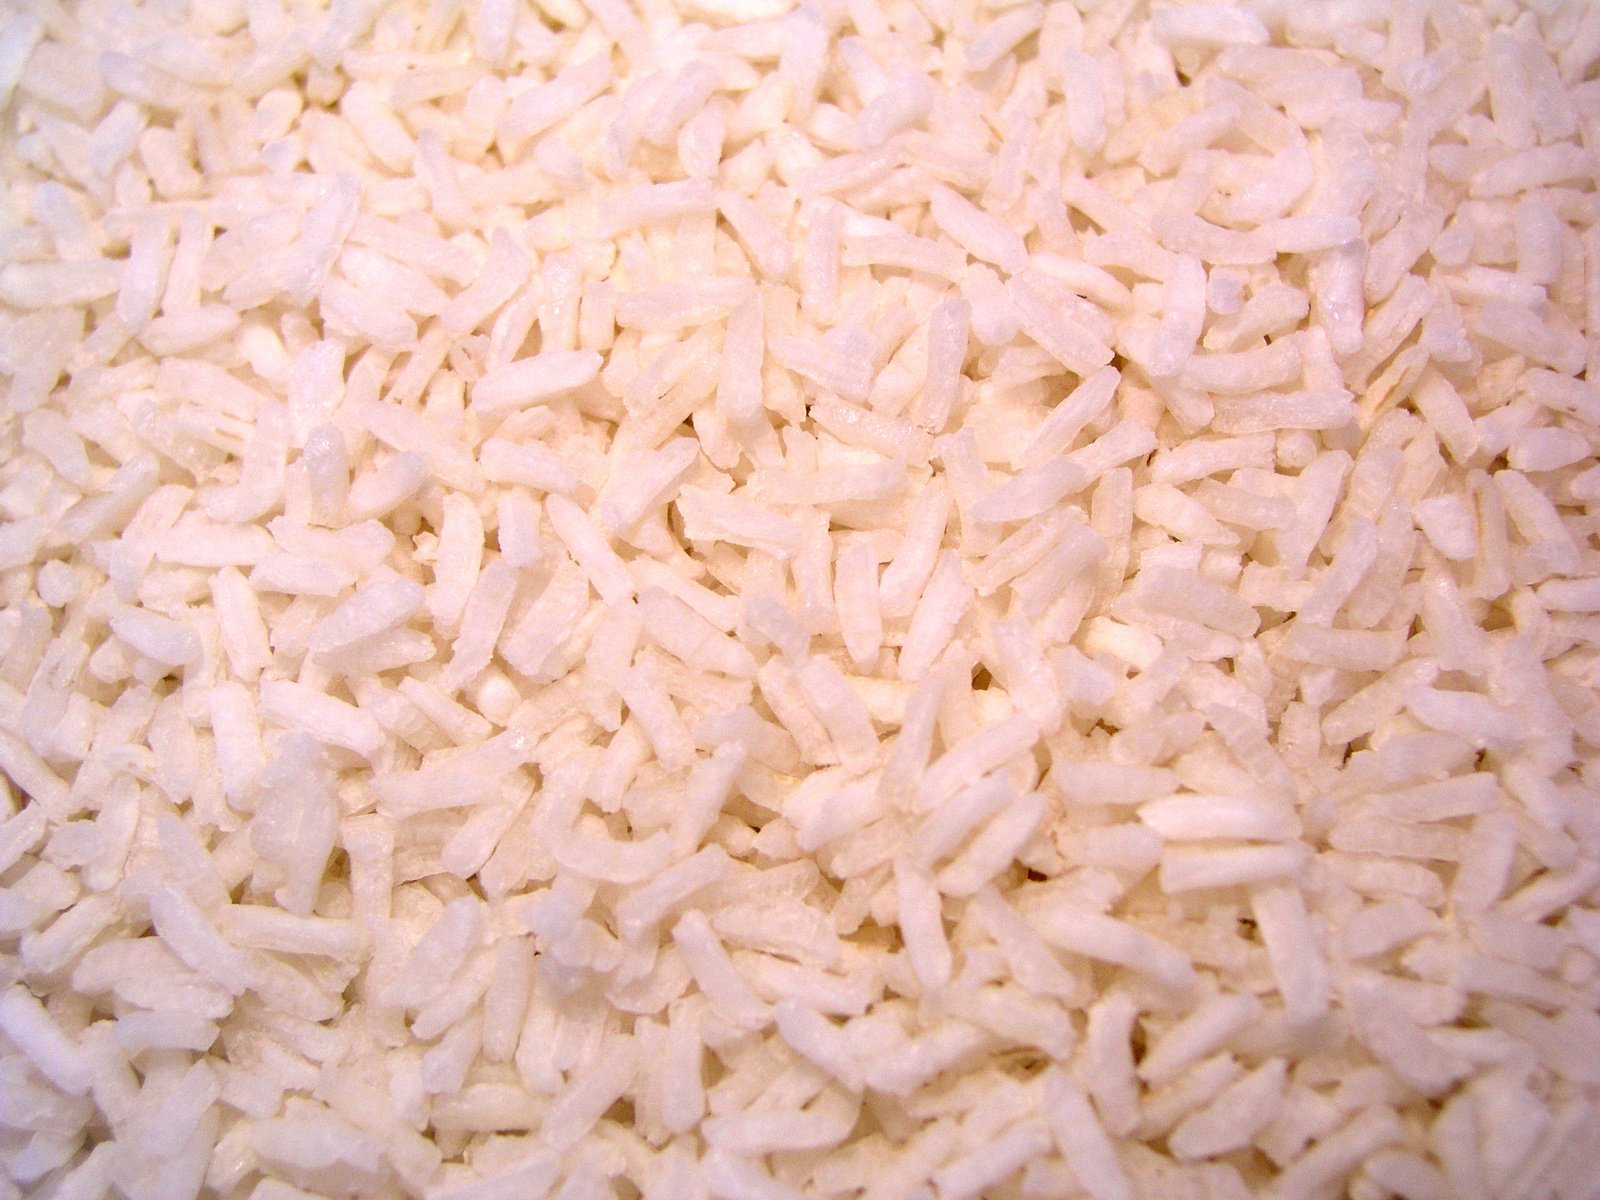 an image of a pile of food that is white